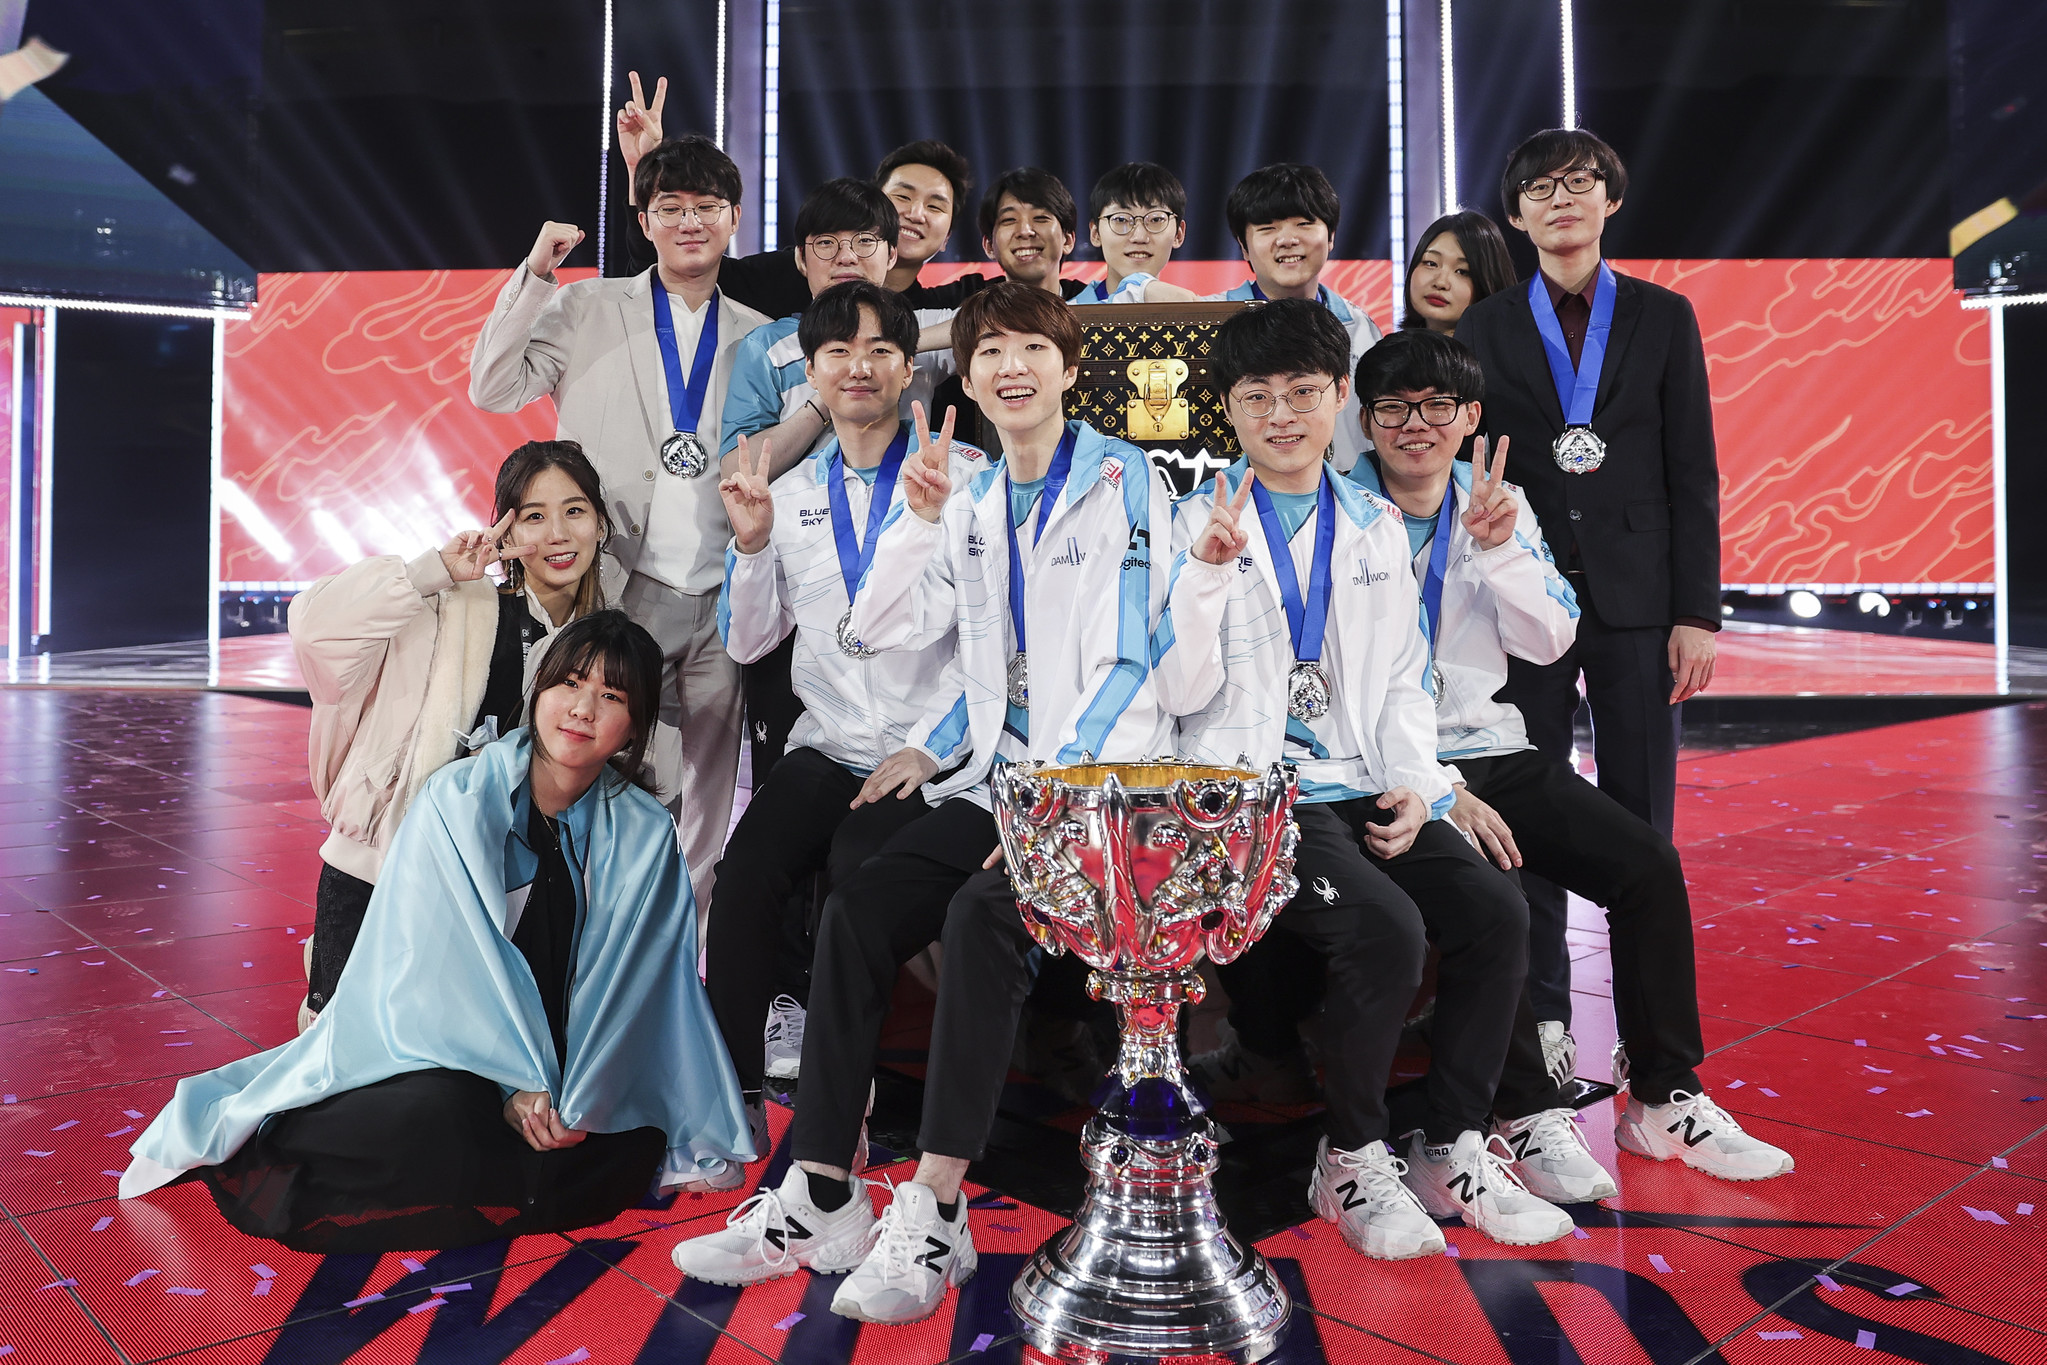 The 2020 League World Championship peaked at 3.8 million viewers